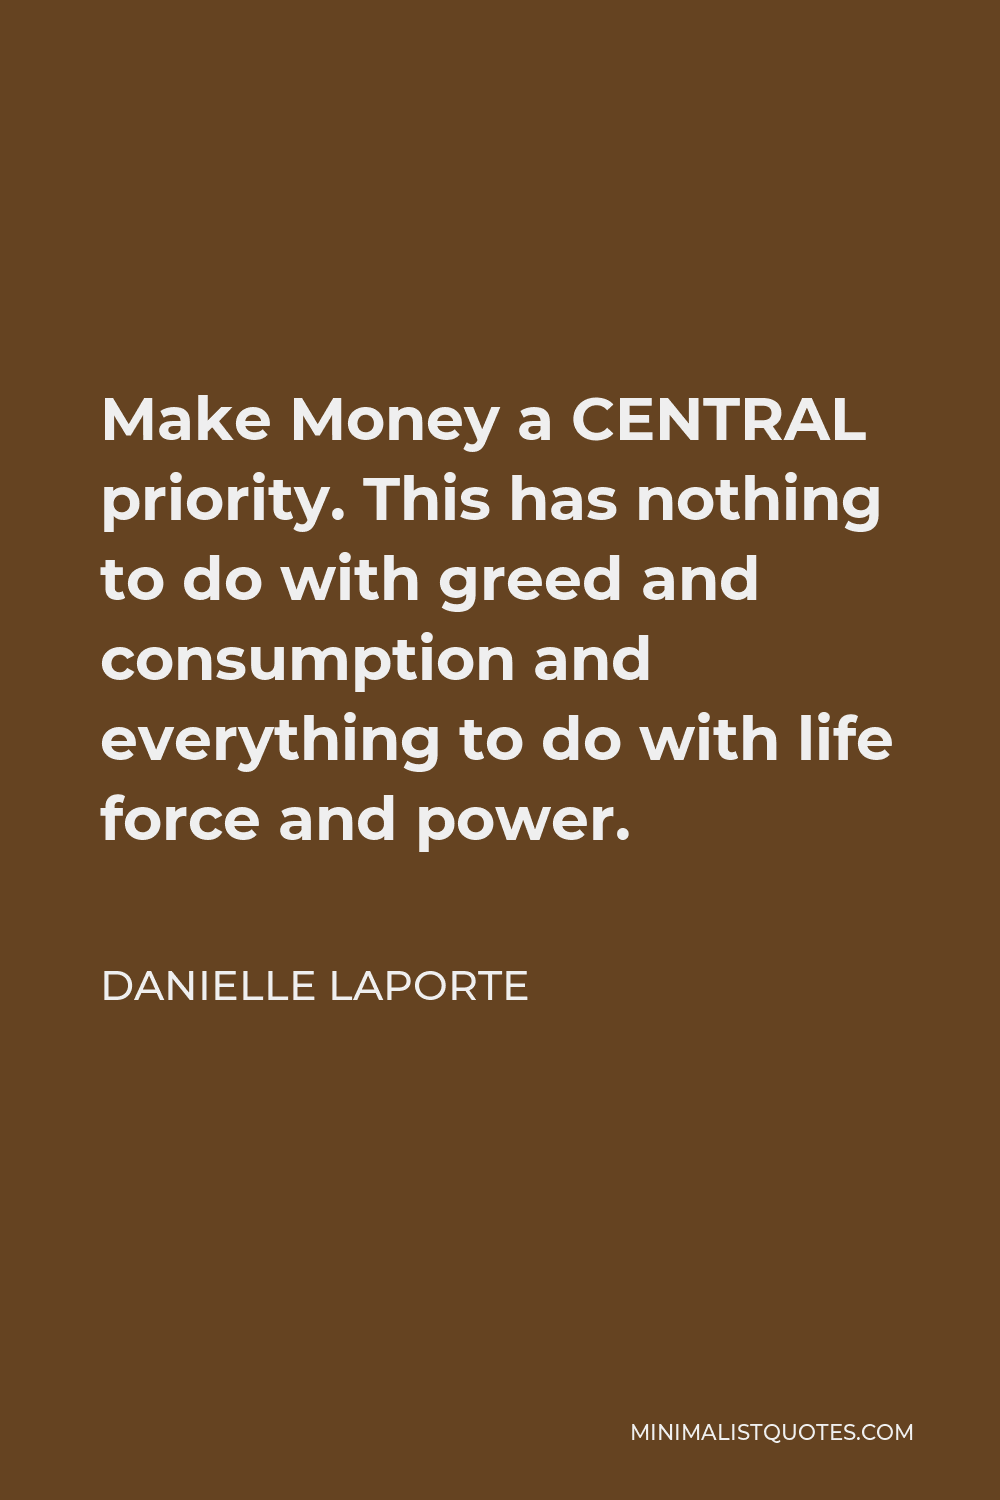 Danielle LaPorte Quote - Make Money a CENTRAL priority. This has nothing to do with greed and consumption and everything to do with life force and power.